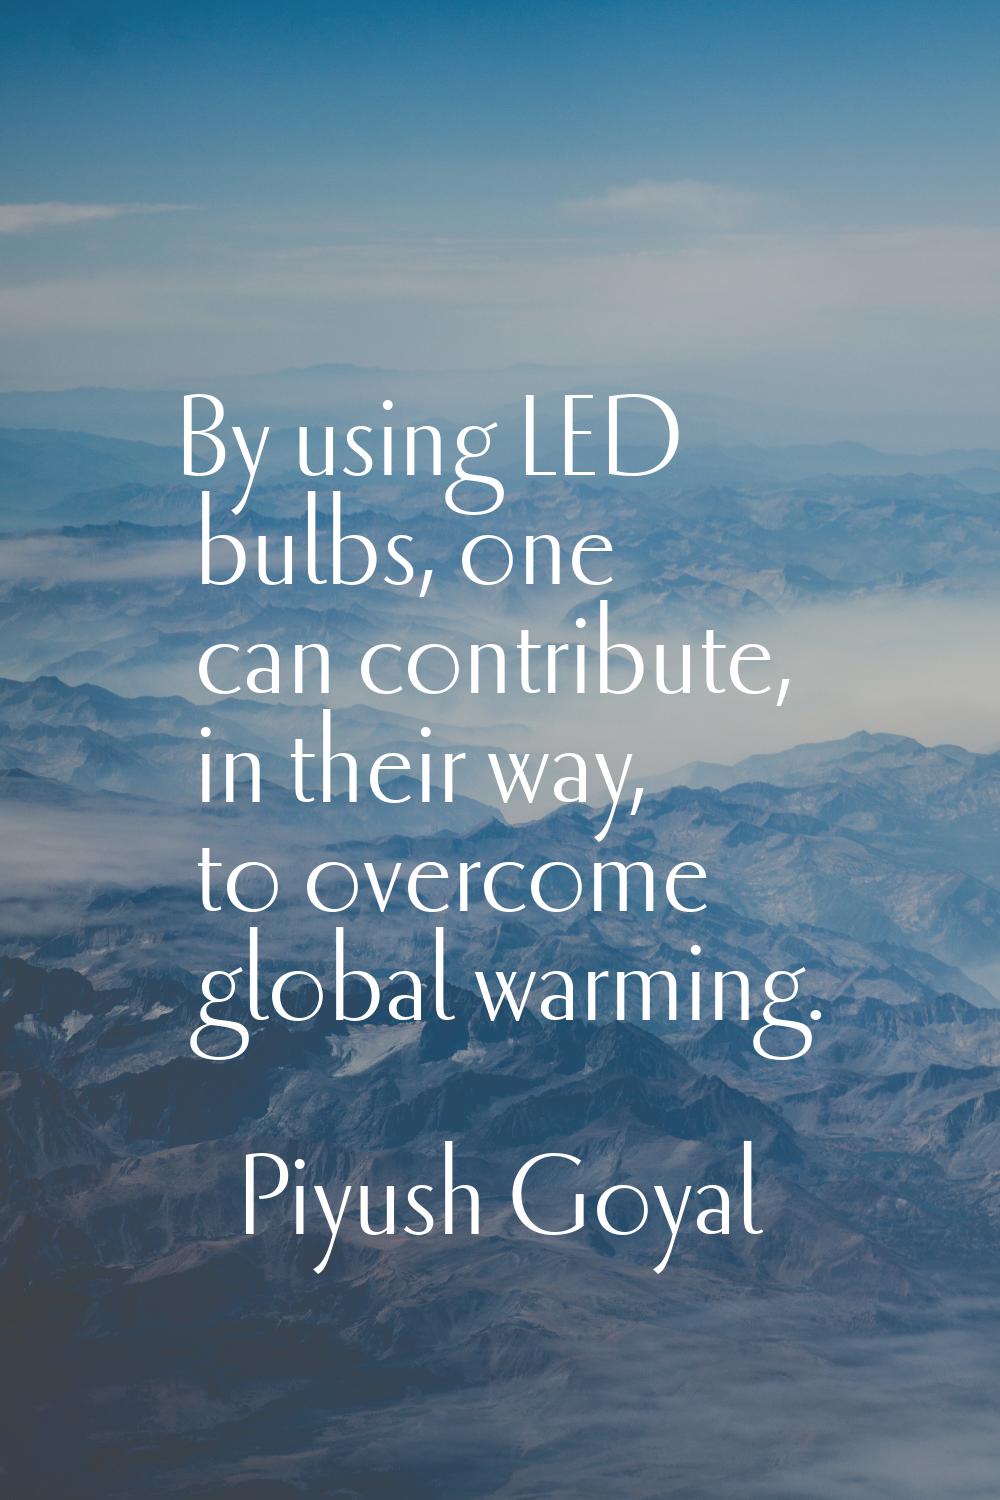 By using LED bulbs, one can contribute, in their way, to overcome global warming.